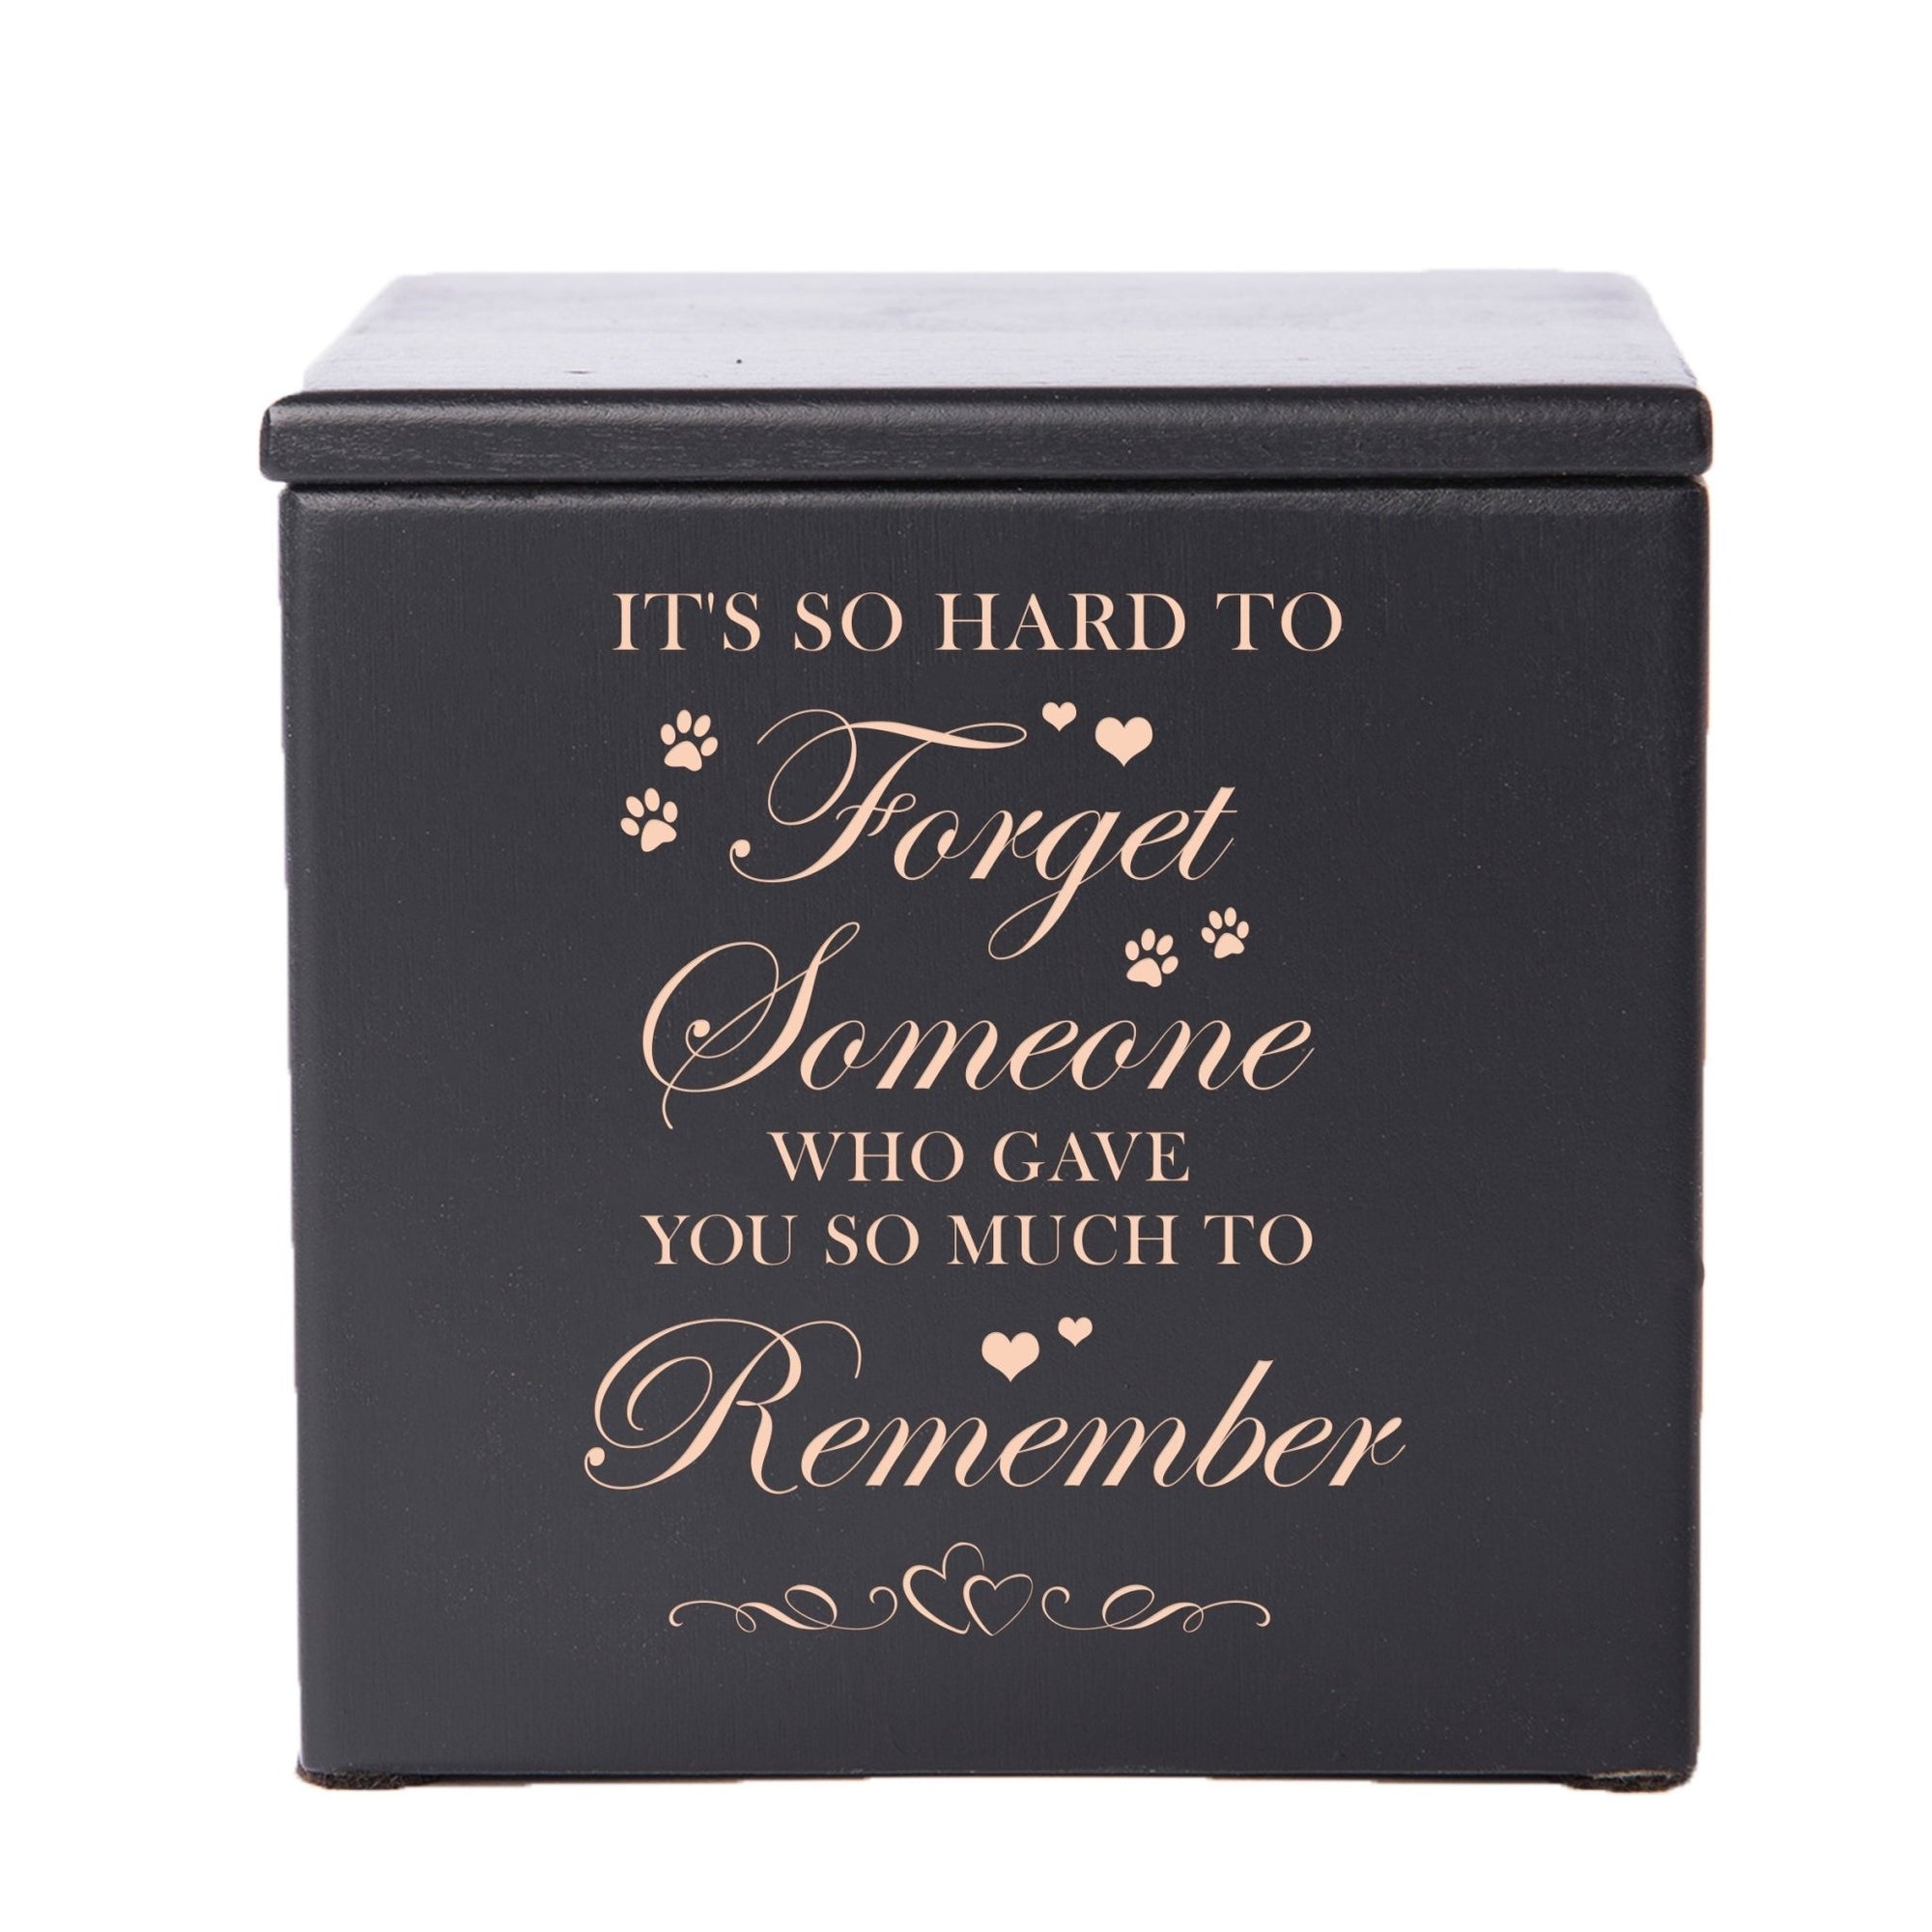 Pet Memorial Keepsake Cremation Urn Box for Dog or Cat - It's So Hard To Forget - LifeSong Milestones